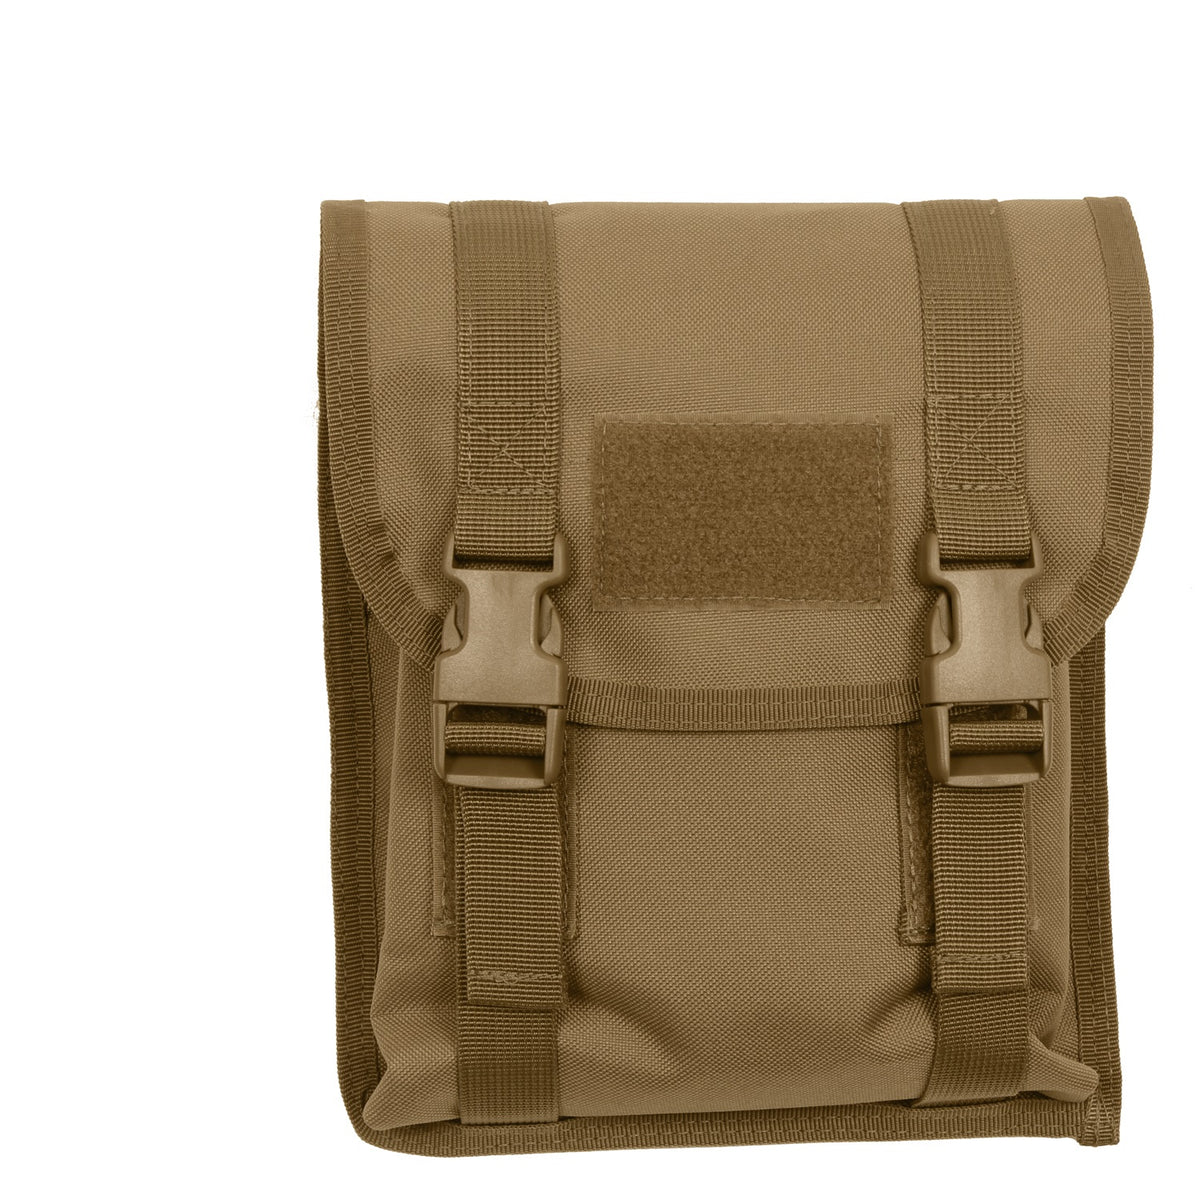 Rothco MOLLE Utility Pouch Coyote Brown